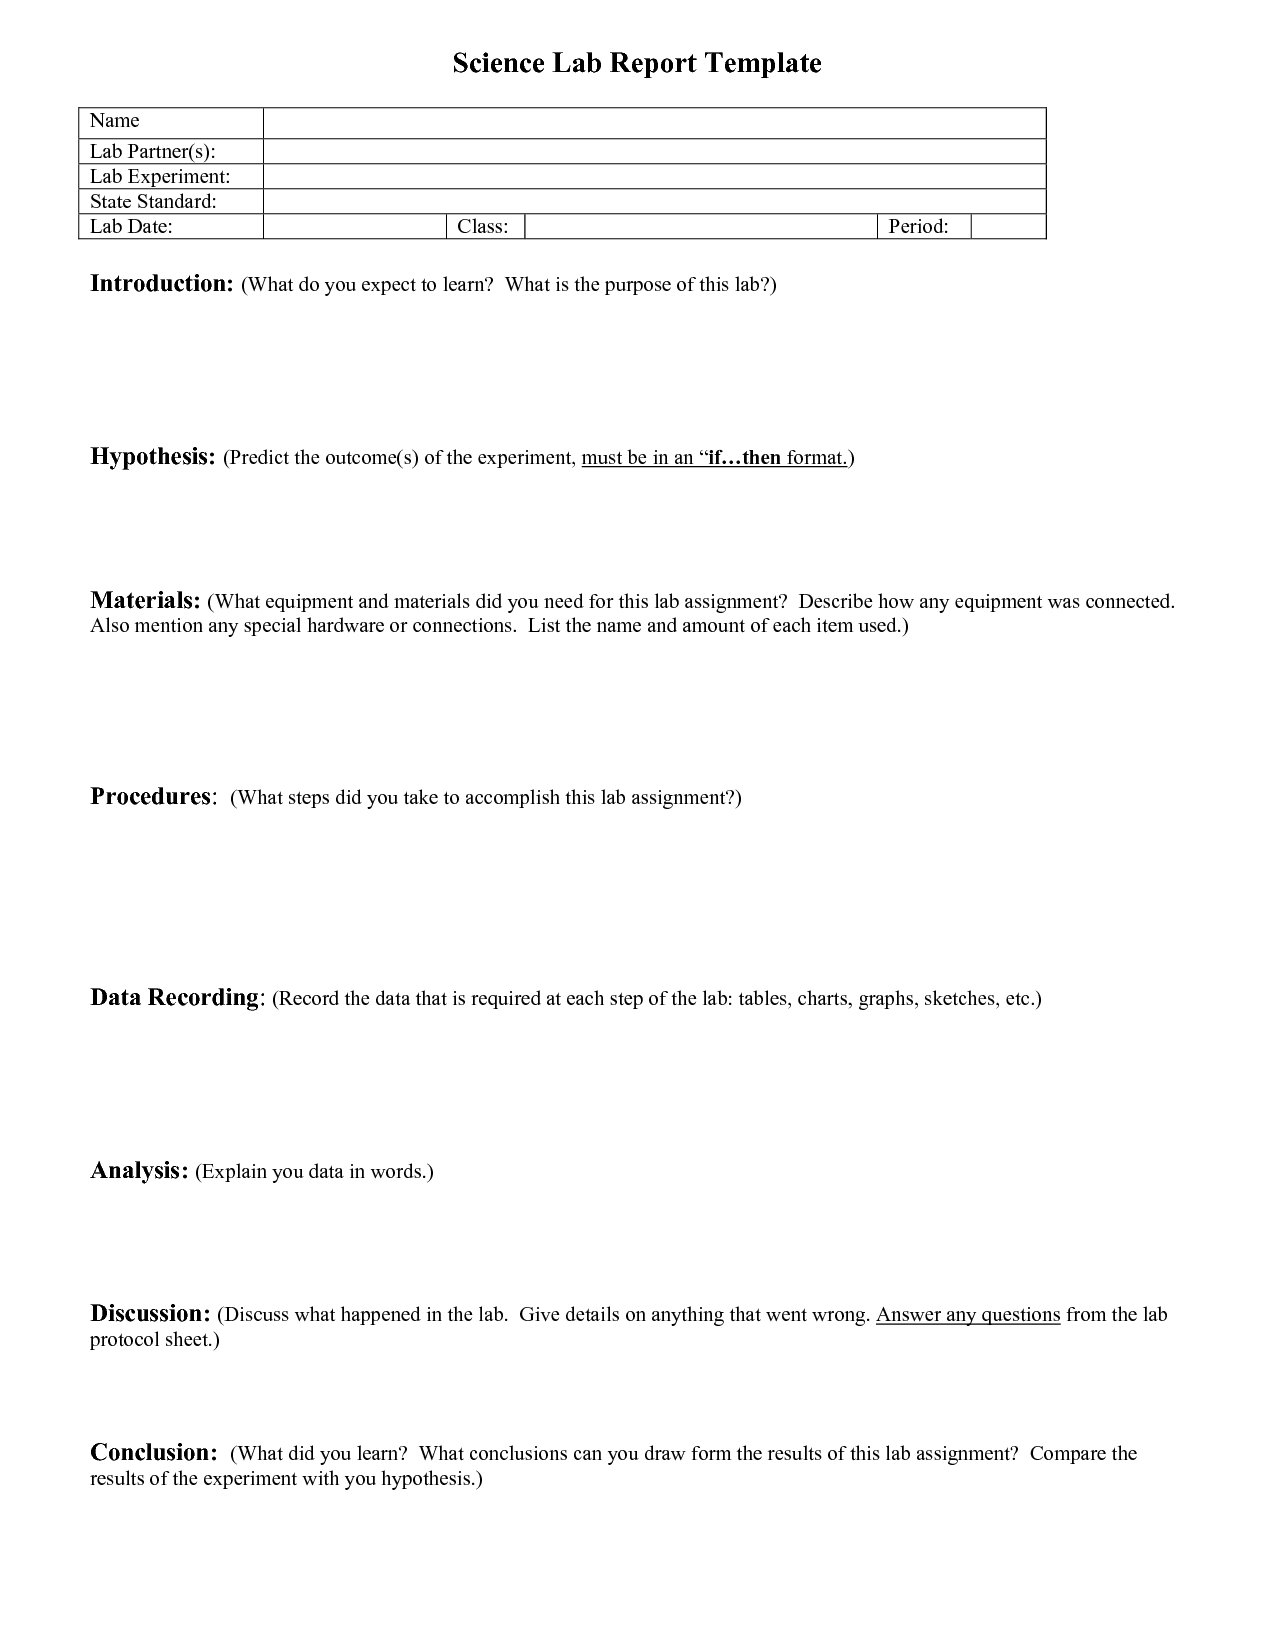 Lab Report Outline | Science Lab Report Template | School With Science Experiment Report Template